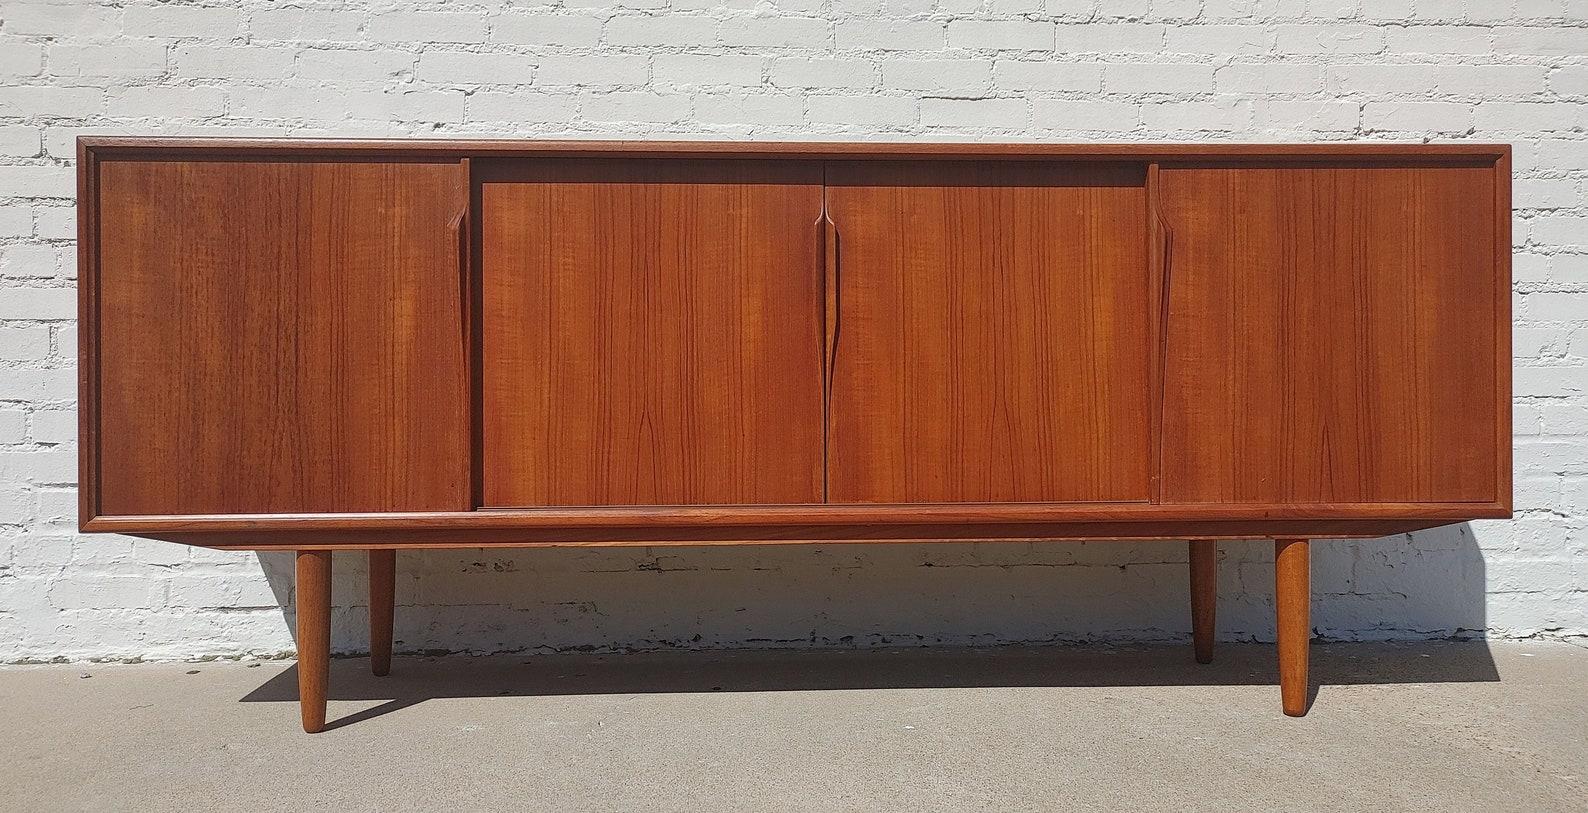 Mid Century Danish Modern Teak Sideboard by Gunni Omann

Above average vintage condition and structurally sound. Has some expected slight finish wear and scratching. Top has been refinished and does not have original factory finish. Outdoor listing